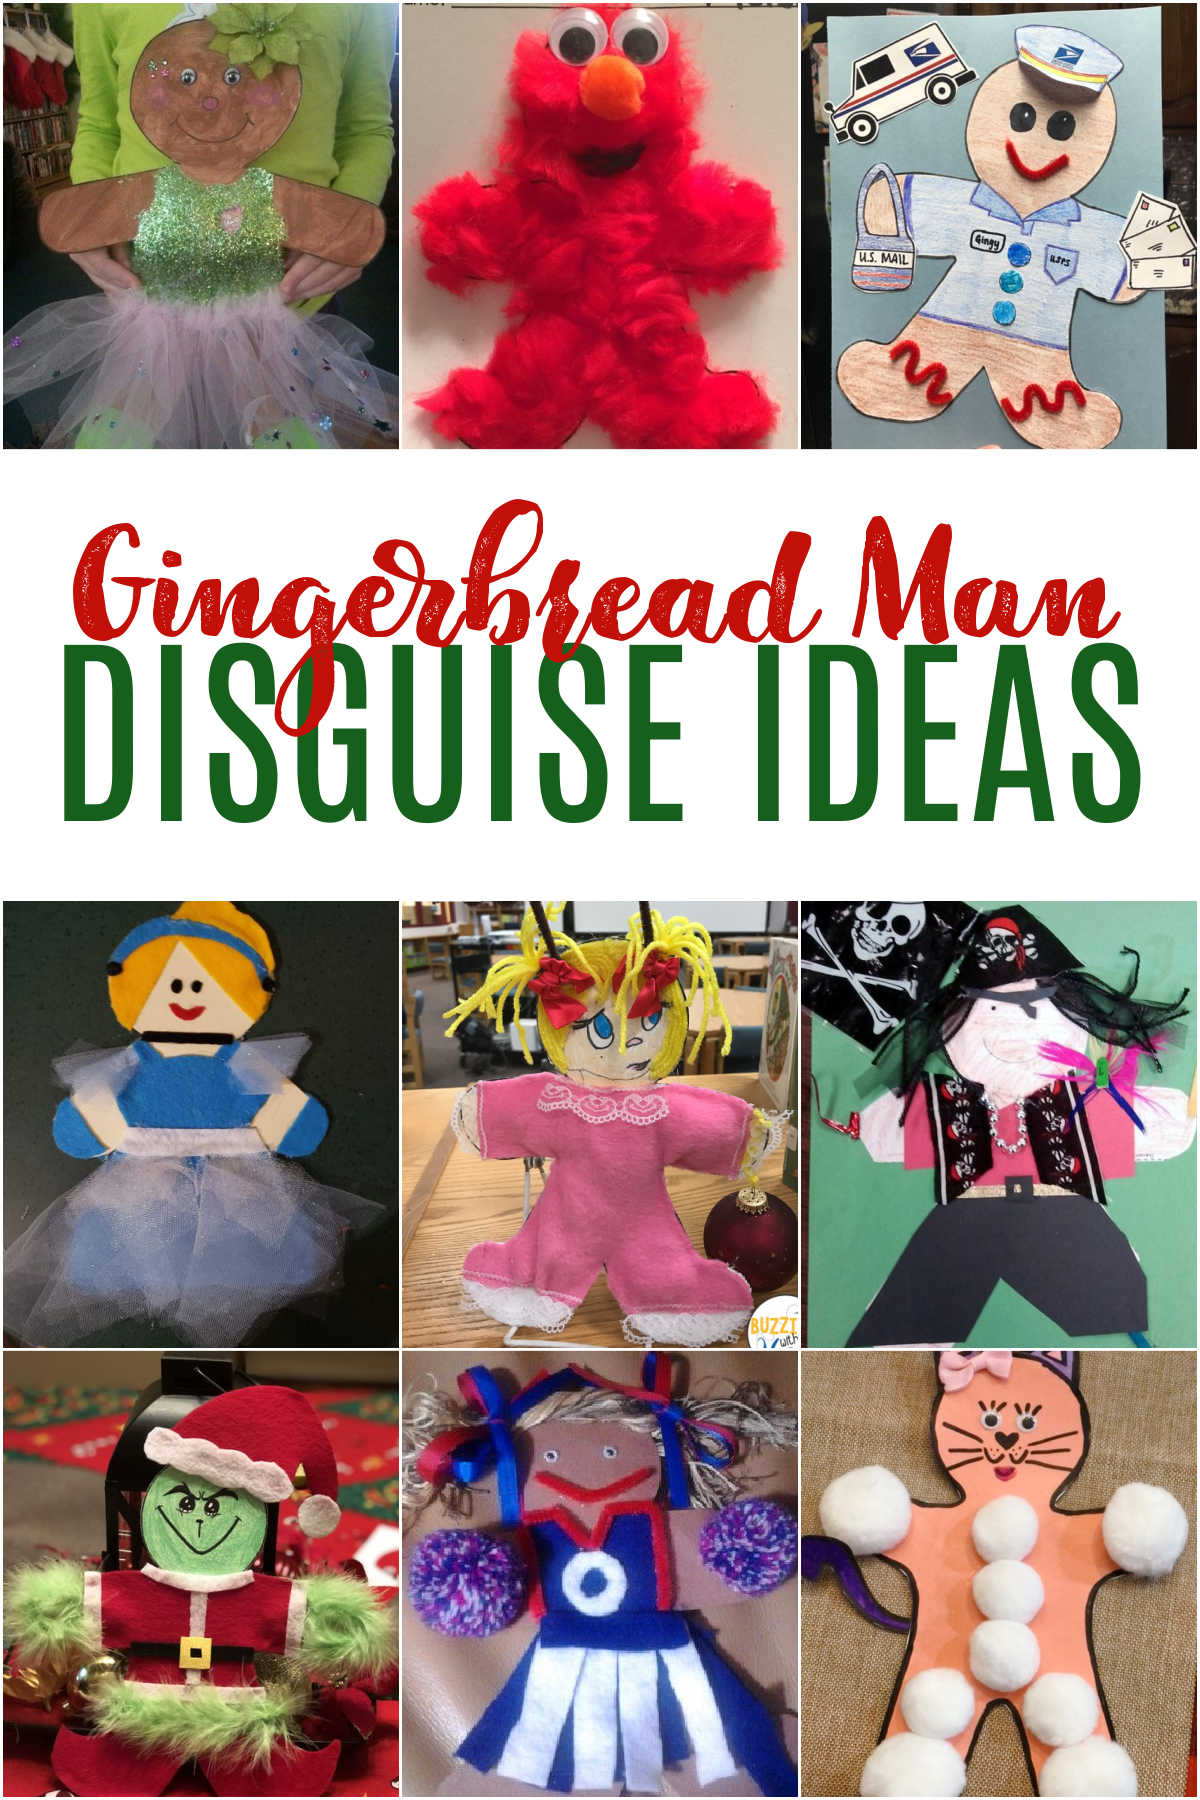 Collage of Gingerbread Man Disguise Ideas